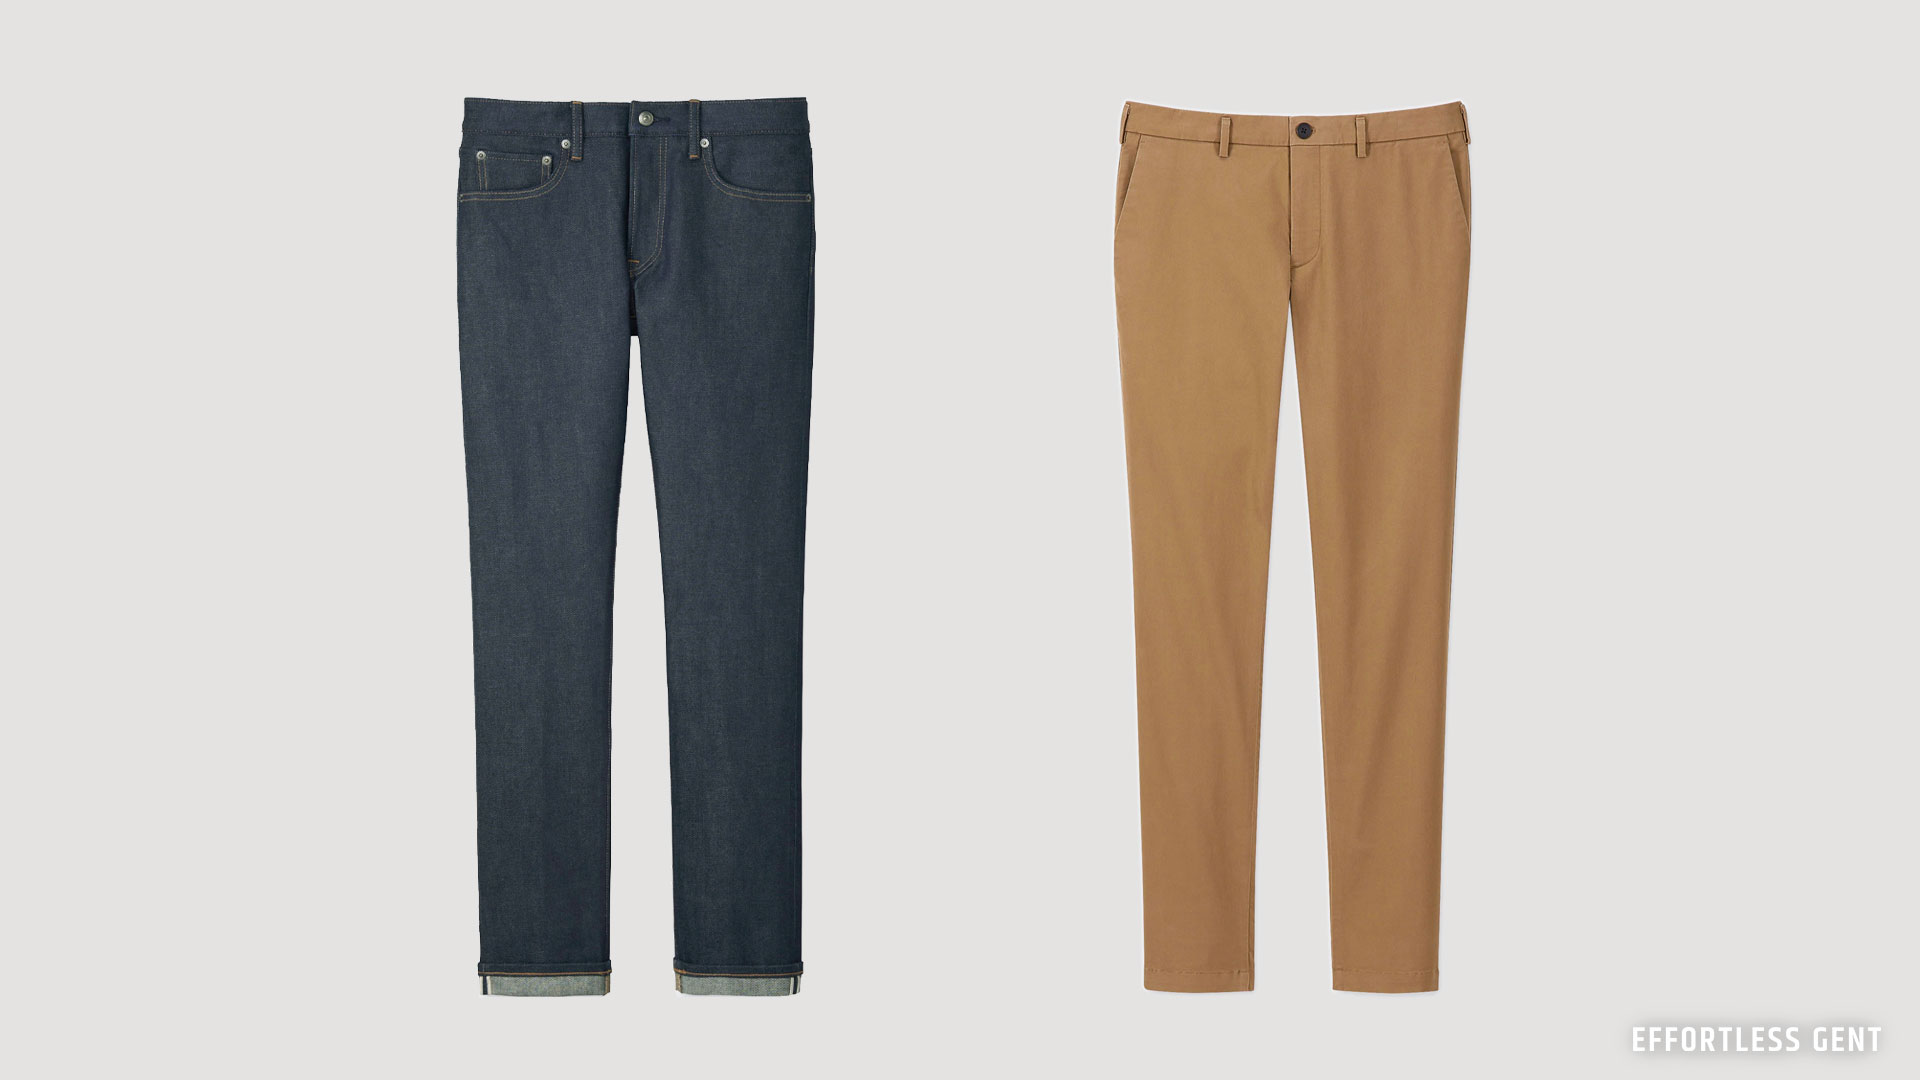 example of denim and chinos that are perfect for a man's minimal lean wardrobe